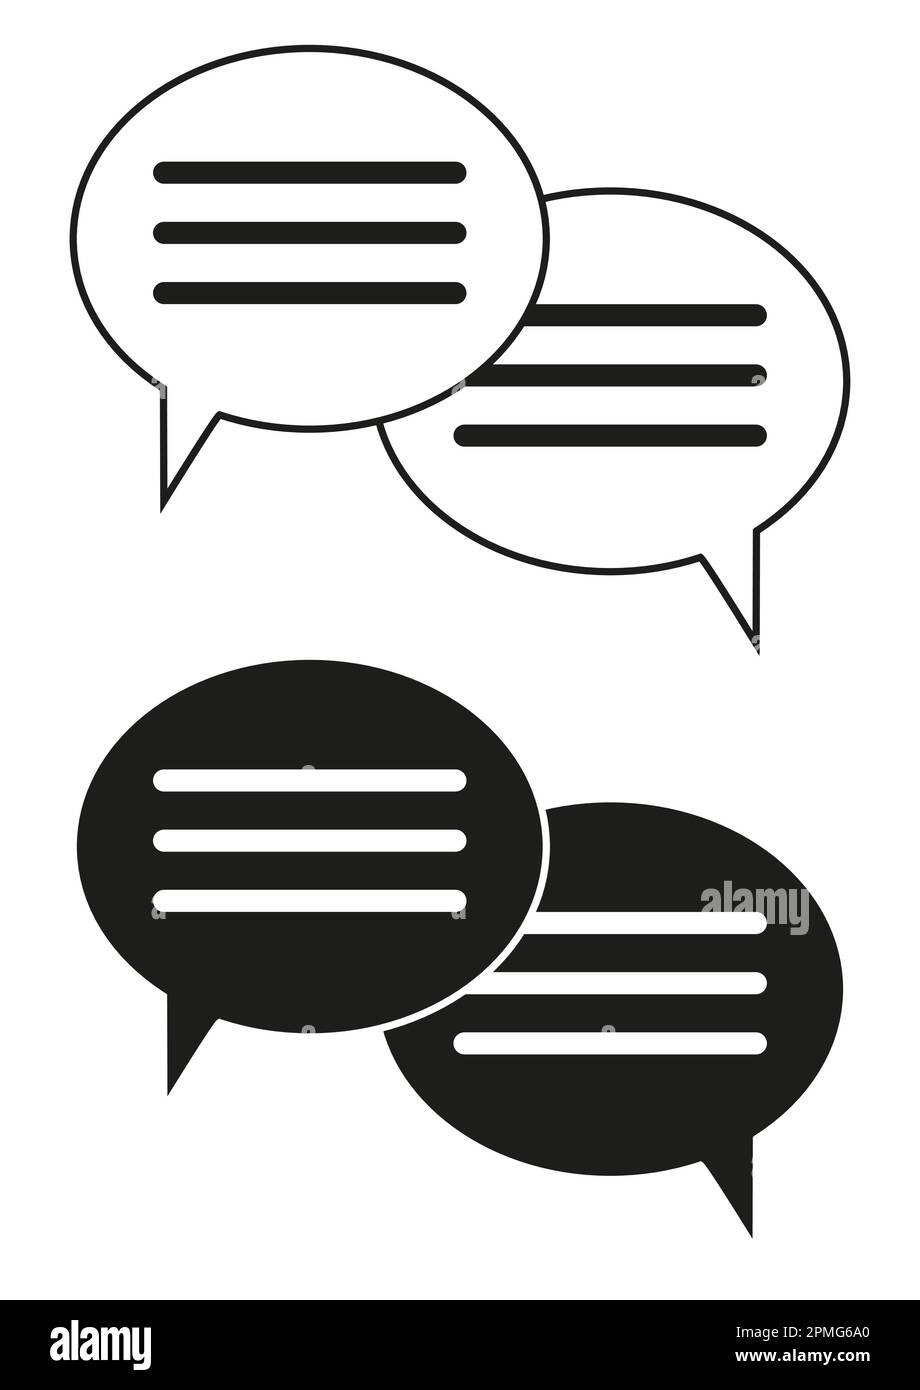 Black And White Text Message Conversation Vector Icon Stock Vector